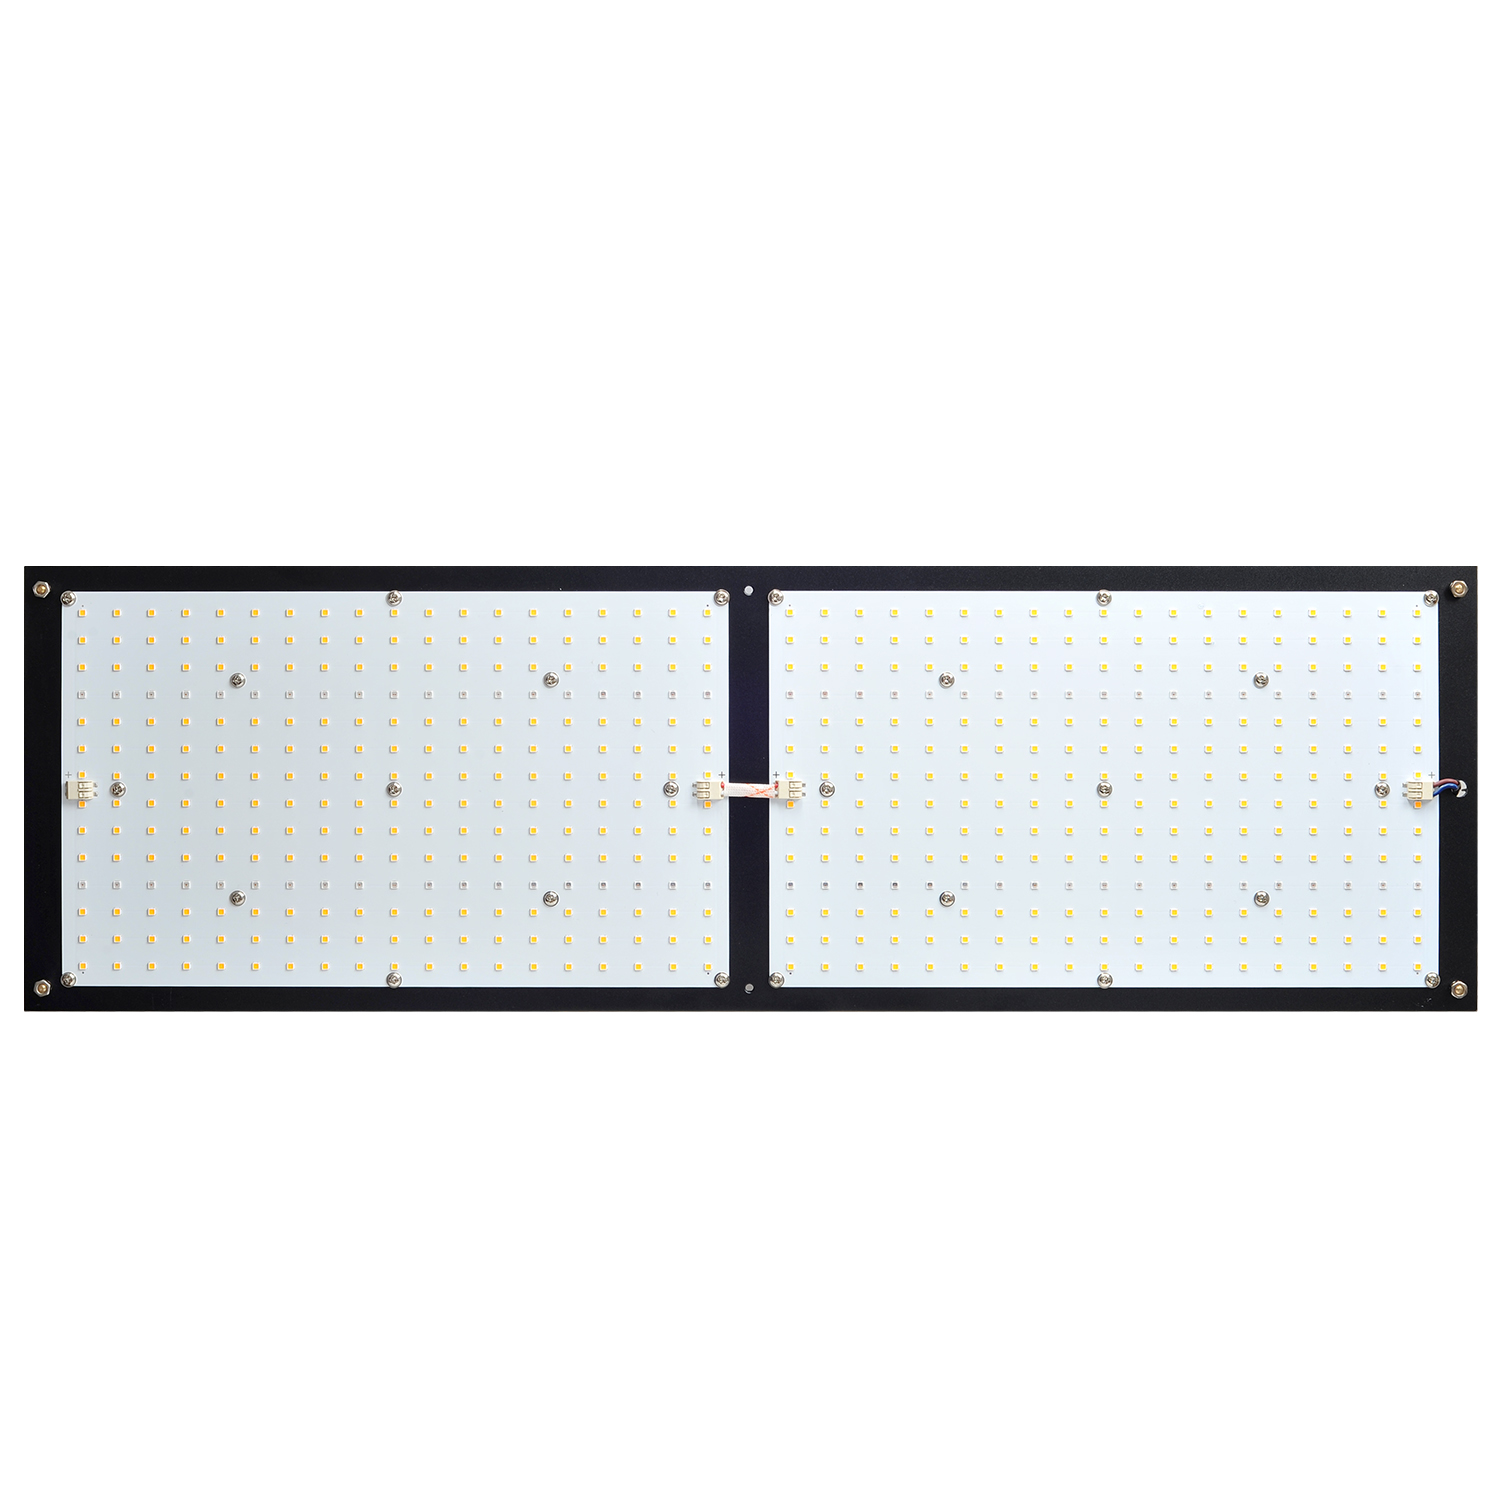 Hot Sale 240W Quantum Board LED Grow Light with Samsung LM301H Chips and Meanwell Driver